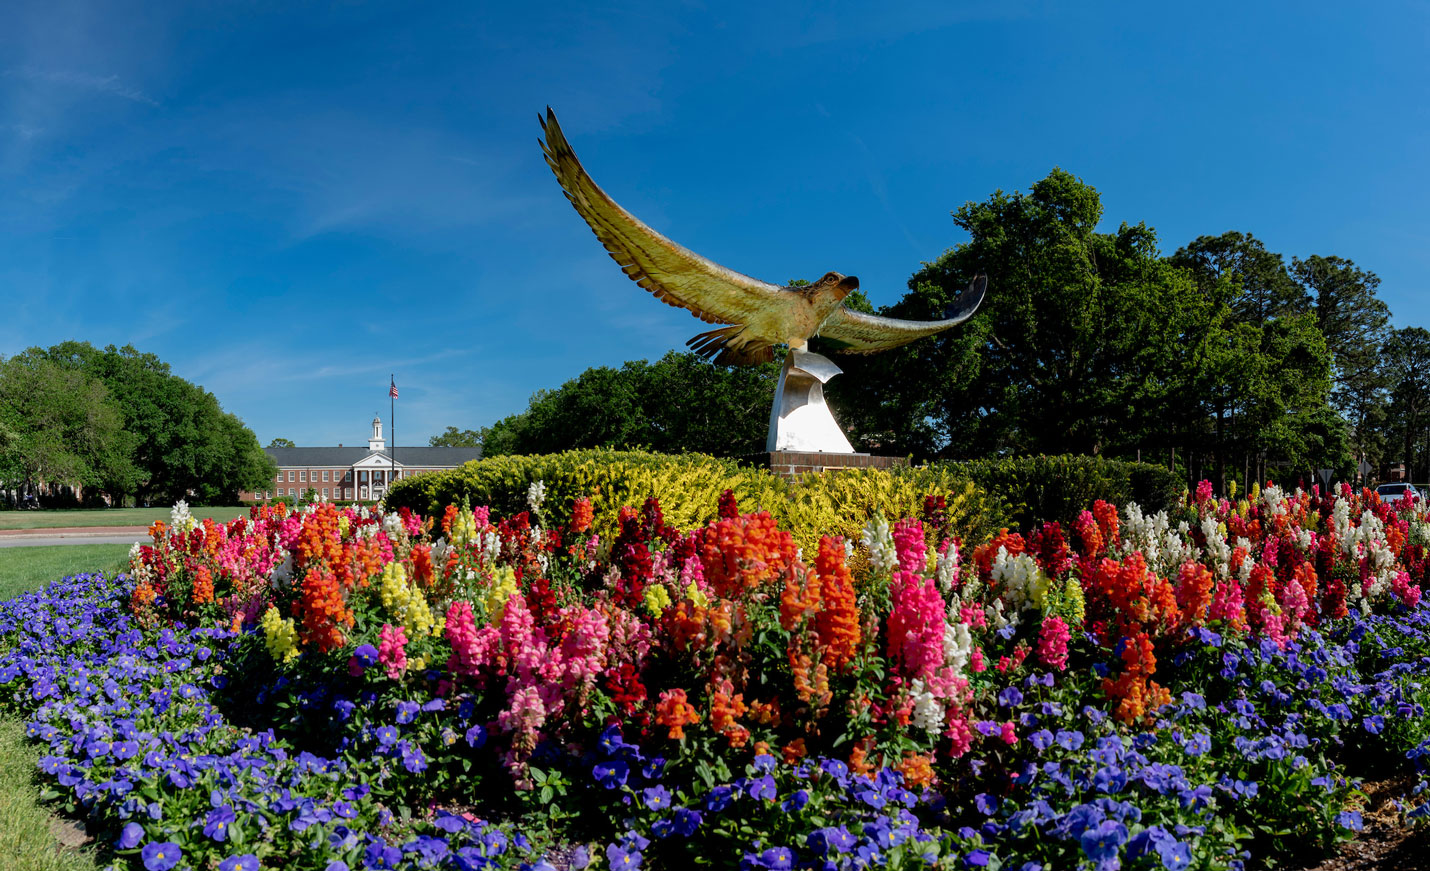 Seahawk Statue surrounded by spring flowers